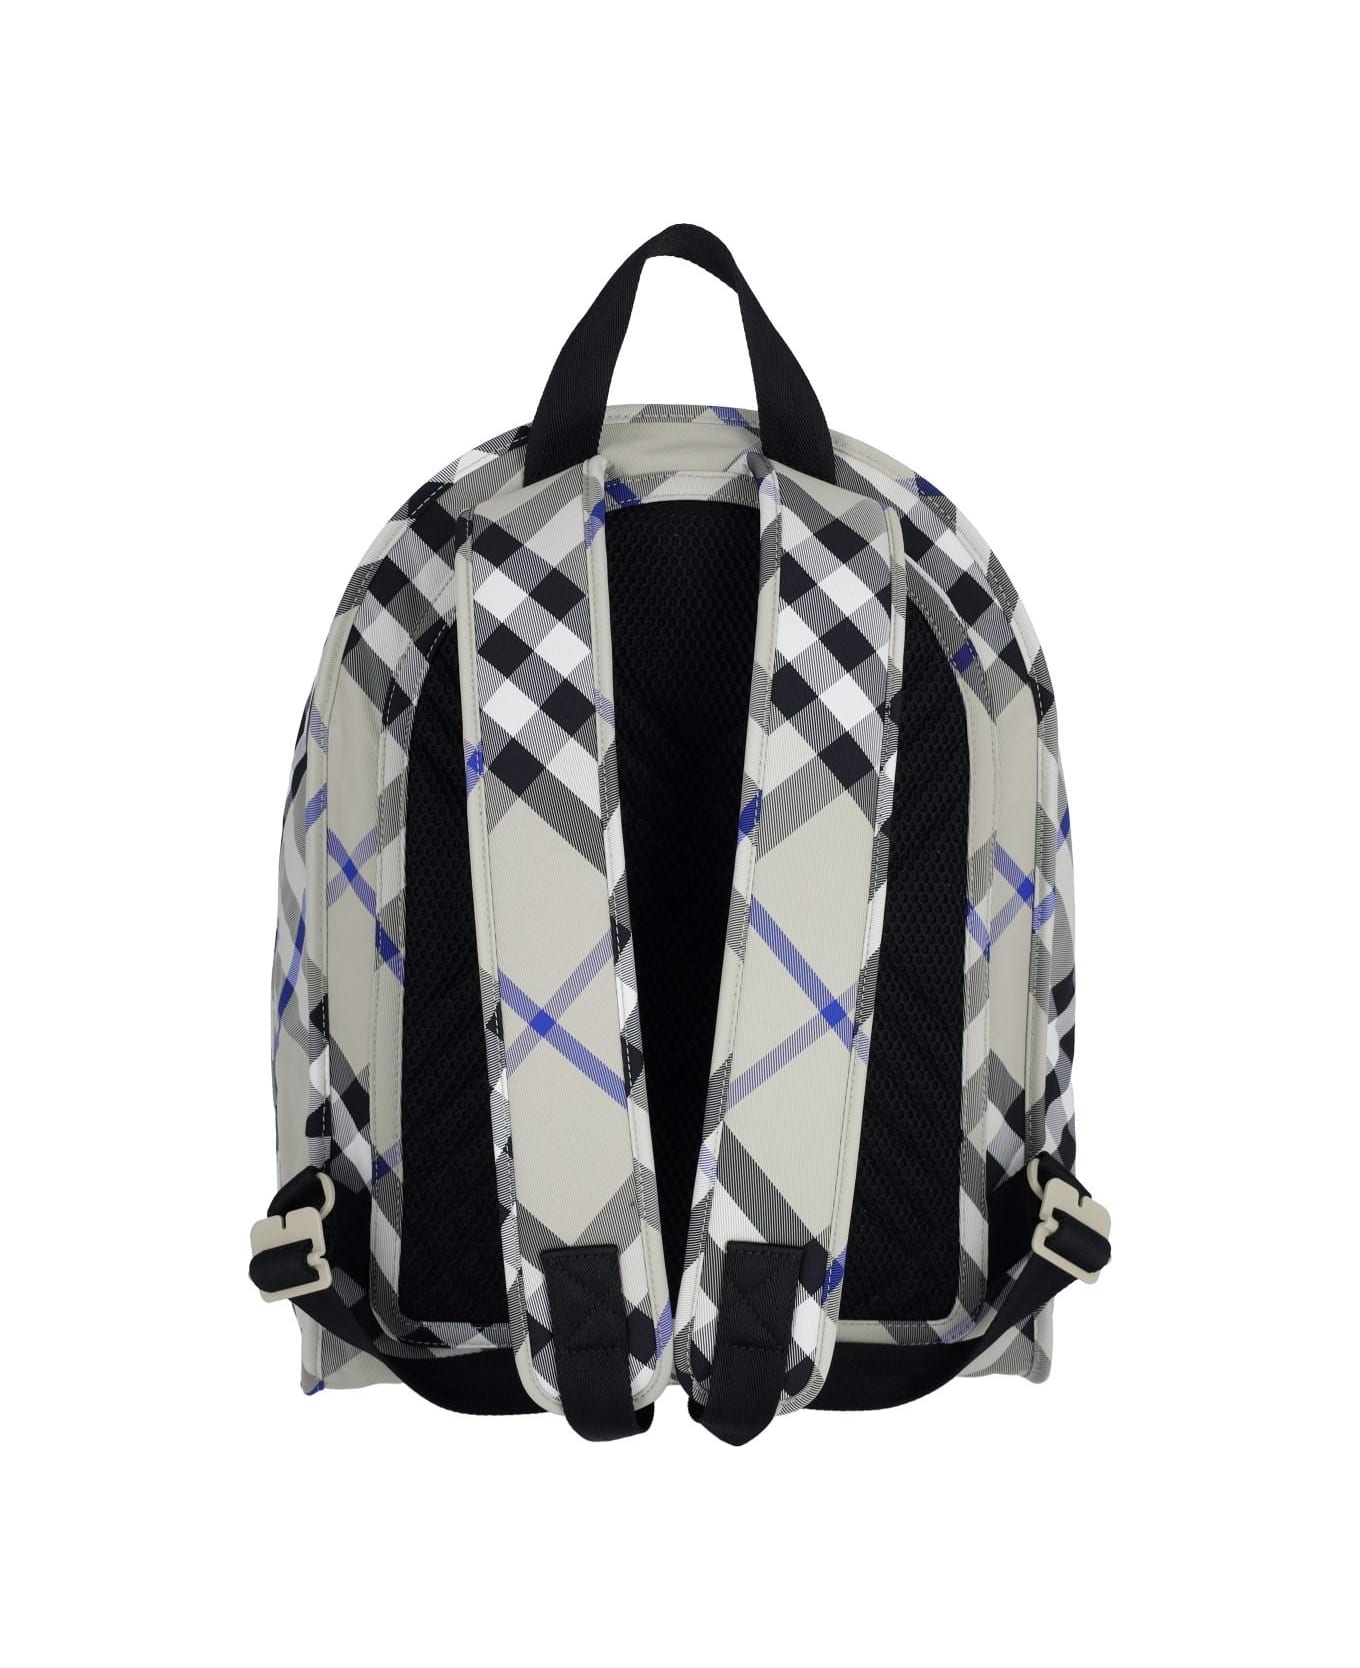 Burberry 'shield' Backpack - Lichen